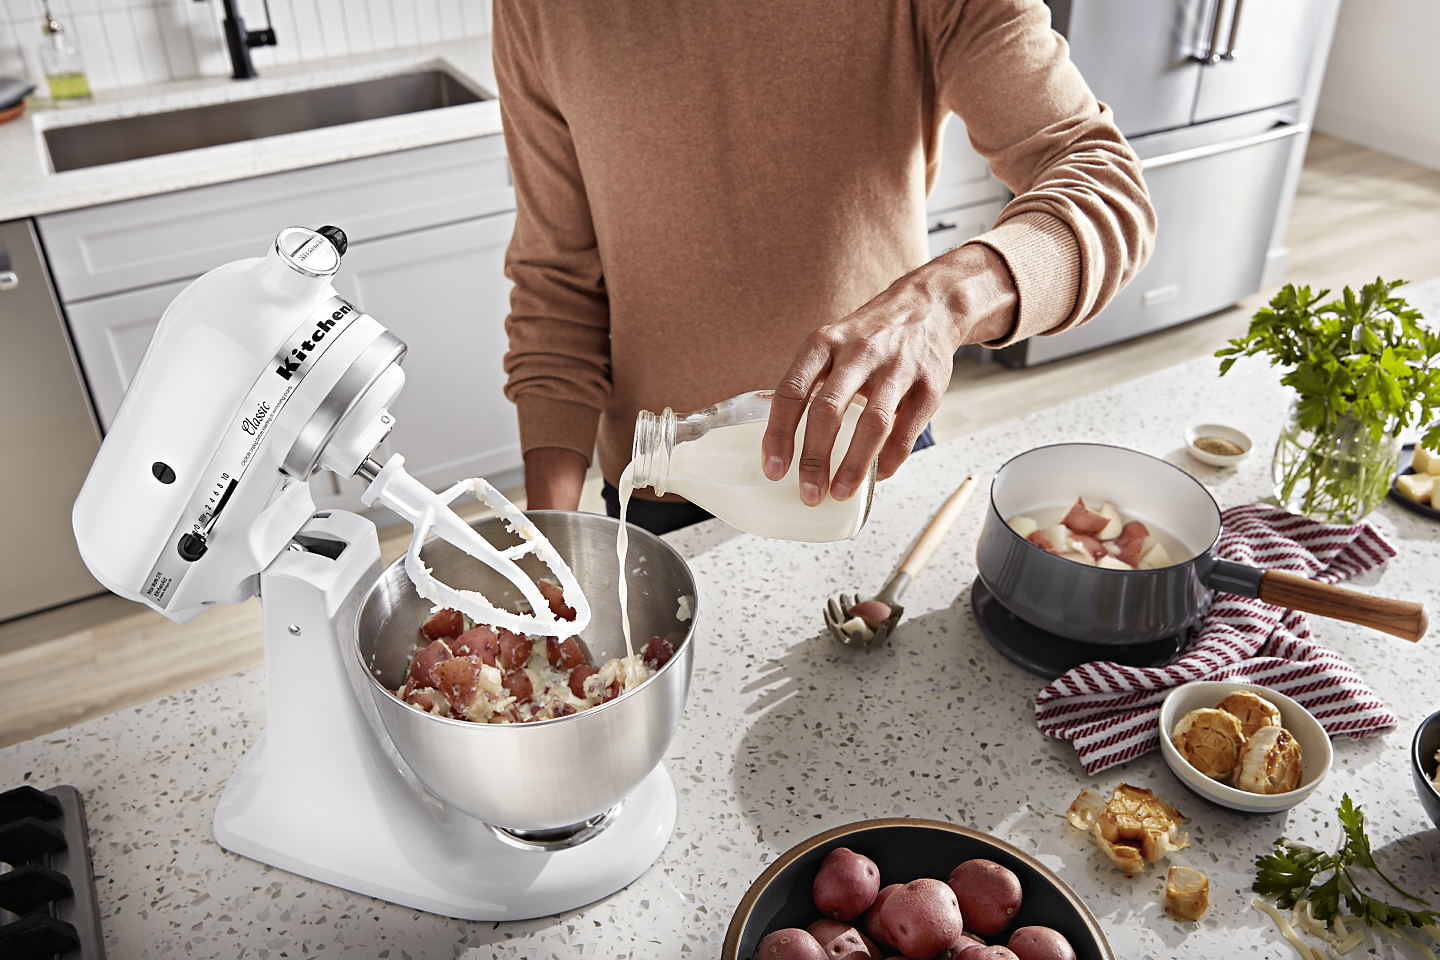 https://kitchenaid-h.assetsadobe.com/is/image/content/dam/business-unit/kitchenaid/en-us/marketing-content/site-assets/page-content/pinch-of-help/how-to-make-mashed-potatoes-with-a-stand-mixer/Mashed-Potato-Stand-Mixer_5.png?fmt=png-alpha&qlt=85,0&resMode=sharp2&op_usm=1.75,0.3,2,0&scl=1&constrain=fit,1